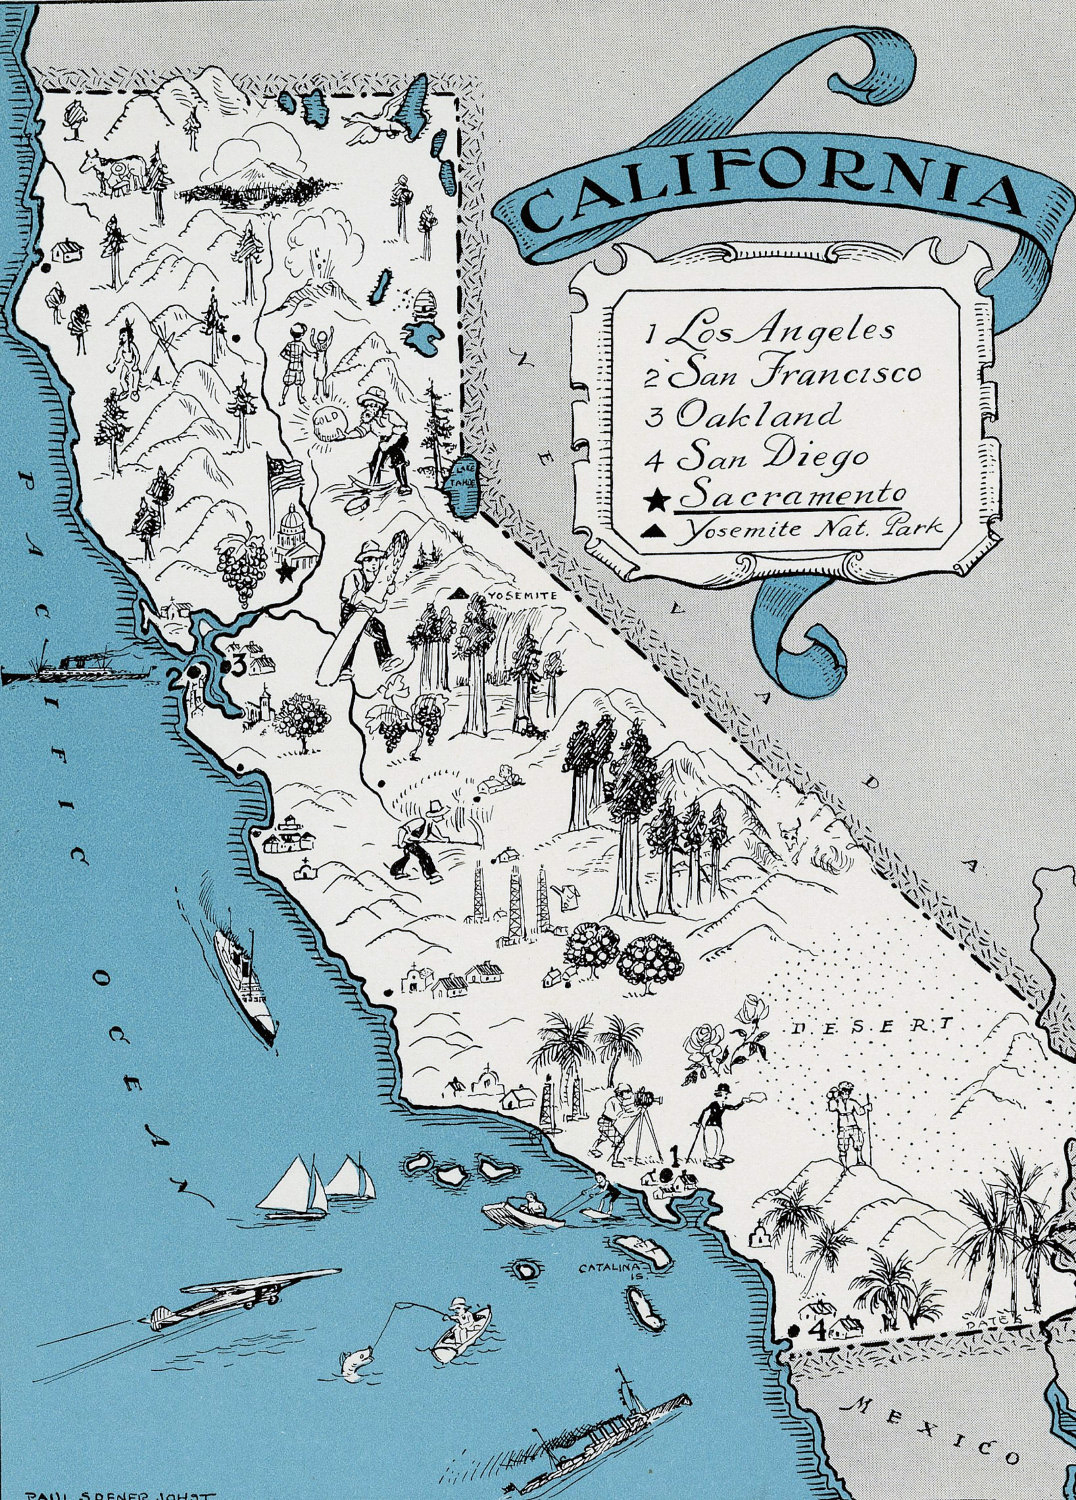 Illustrated Tourist Map Of California State. California State - Illustrated Map Of California